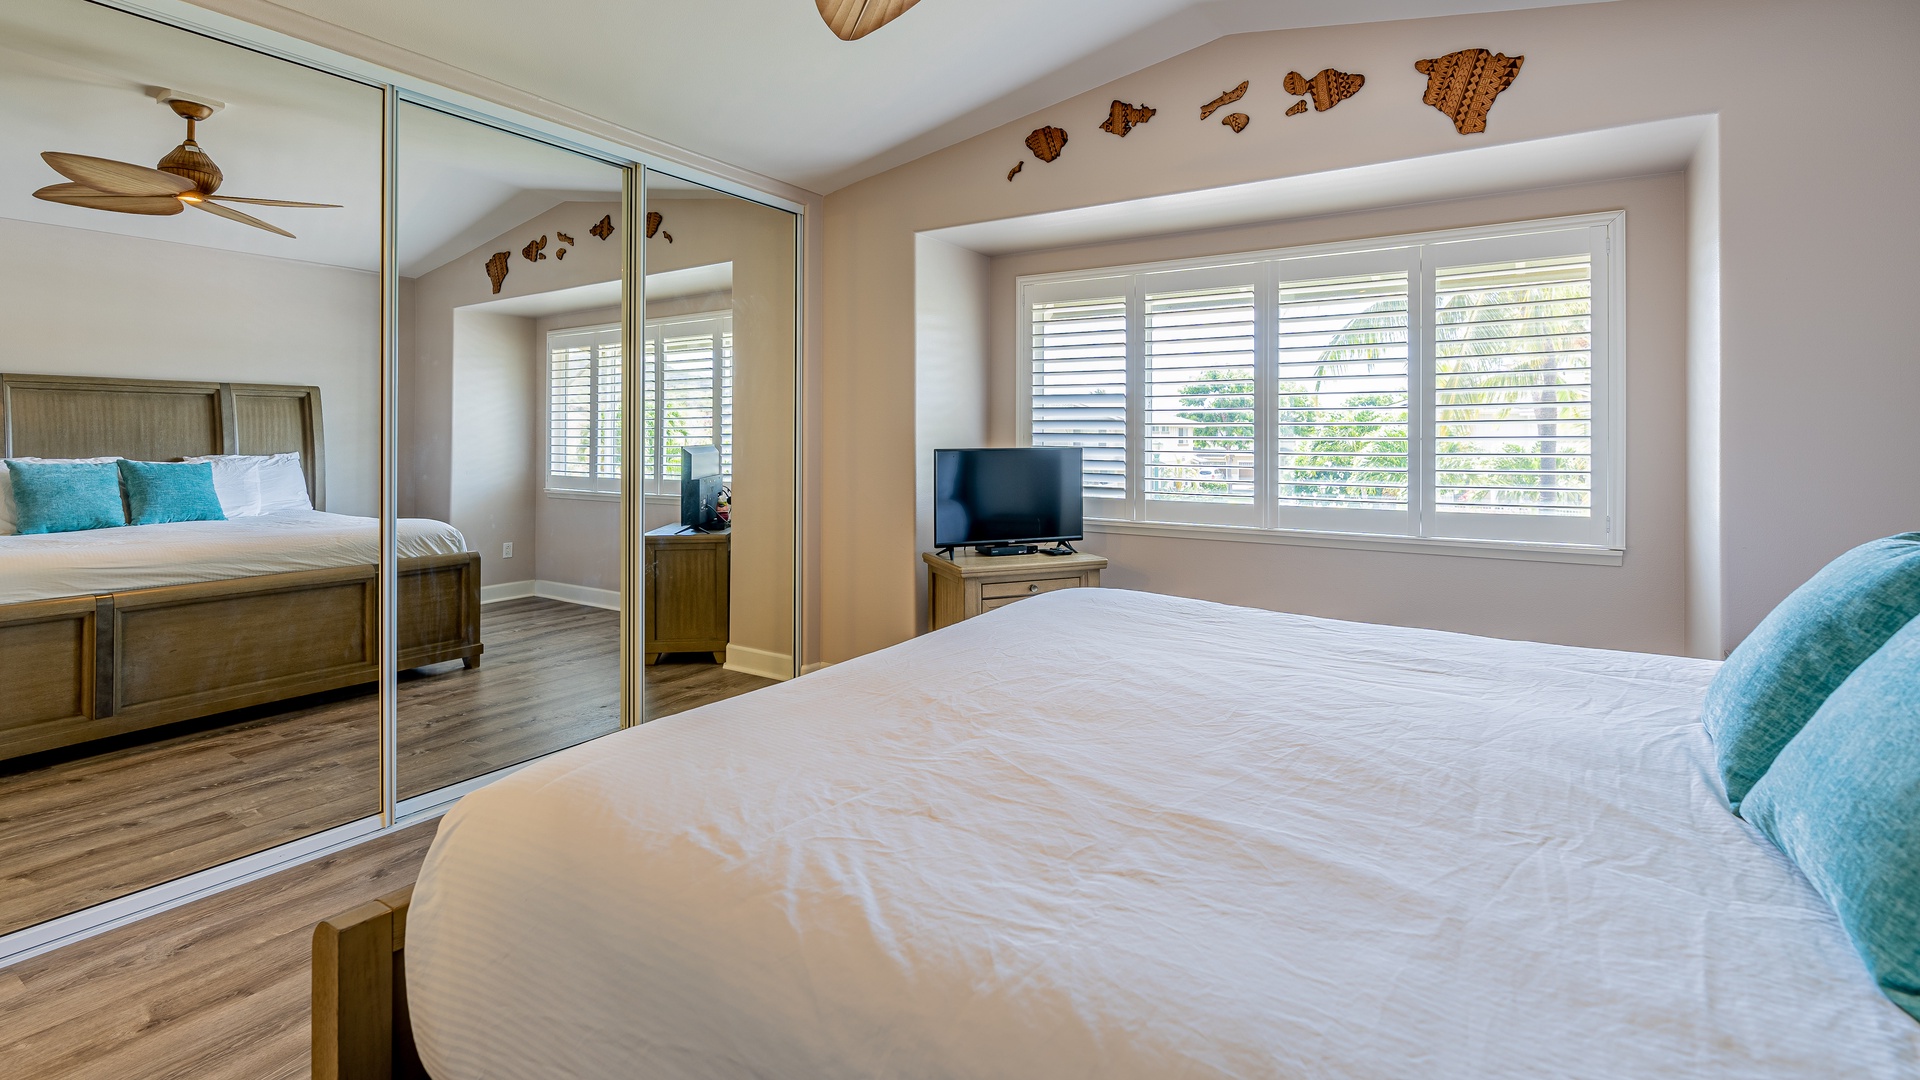 Kapolei Vacation Rentals, Hillside Villas 1508-2 - Wake up refreshed to views of island skies in the primary guest bedroom.